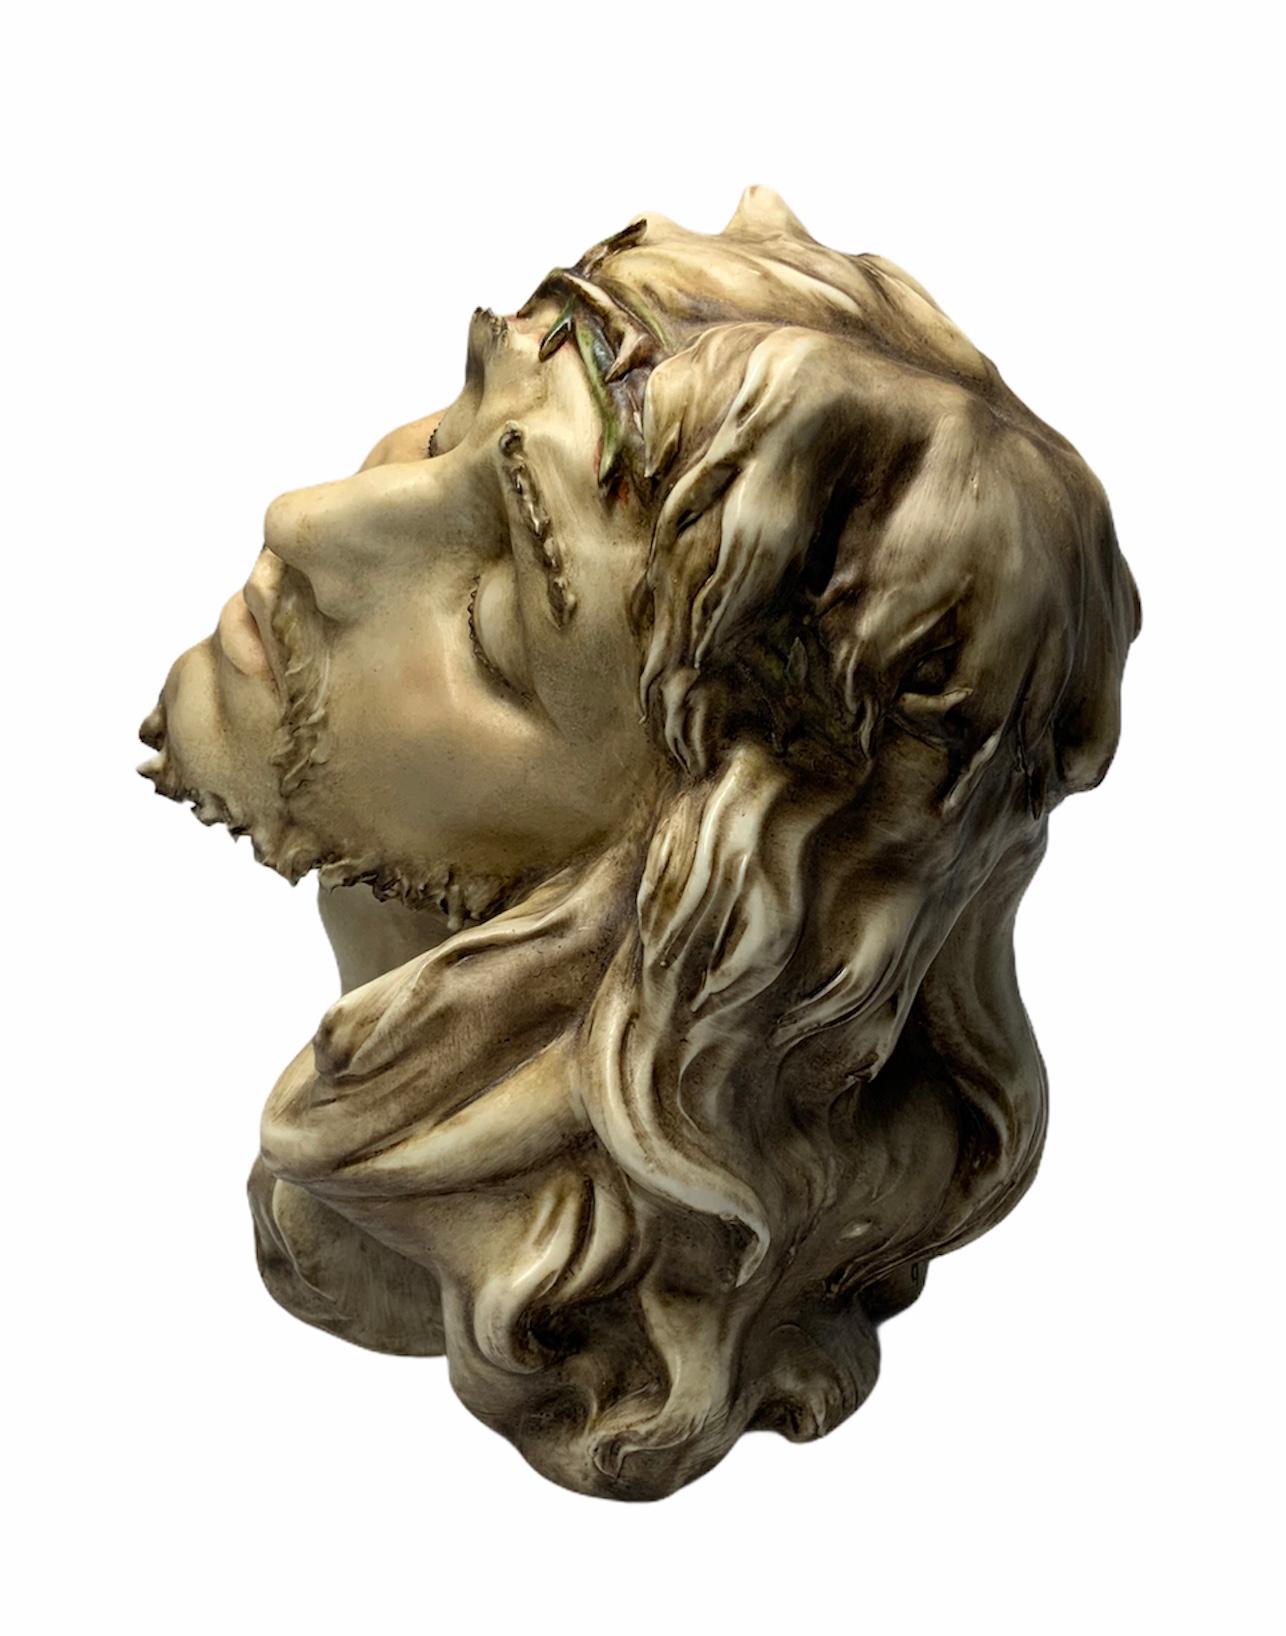 This a very well done head, face & neck Porcelain of the crucified Christ by an Italian sculptor- A.Borsato. 
The face expresses the pain & sadness of the Christ. The sculpture is marked with the stamp A.Borsato, Milano Italy and also his